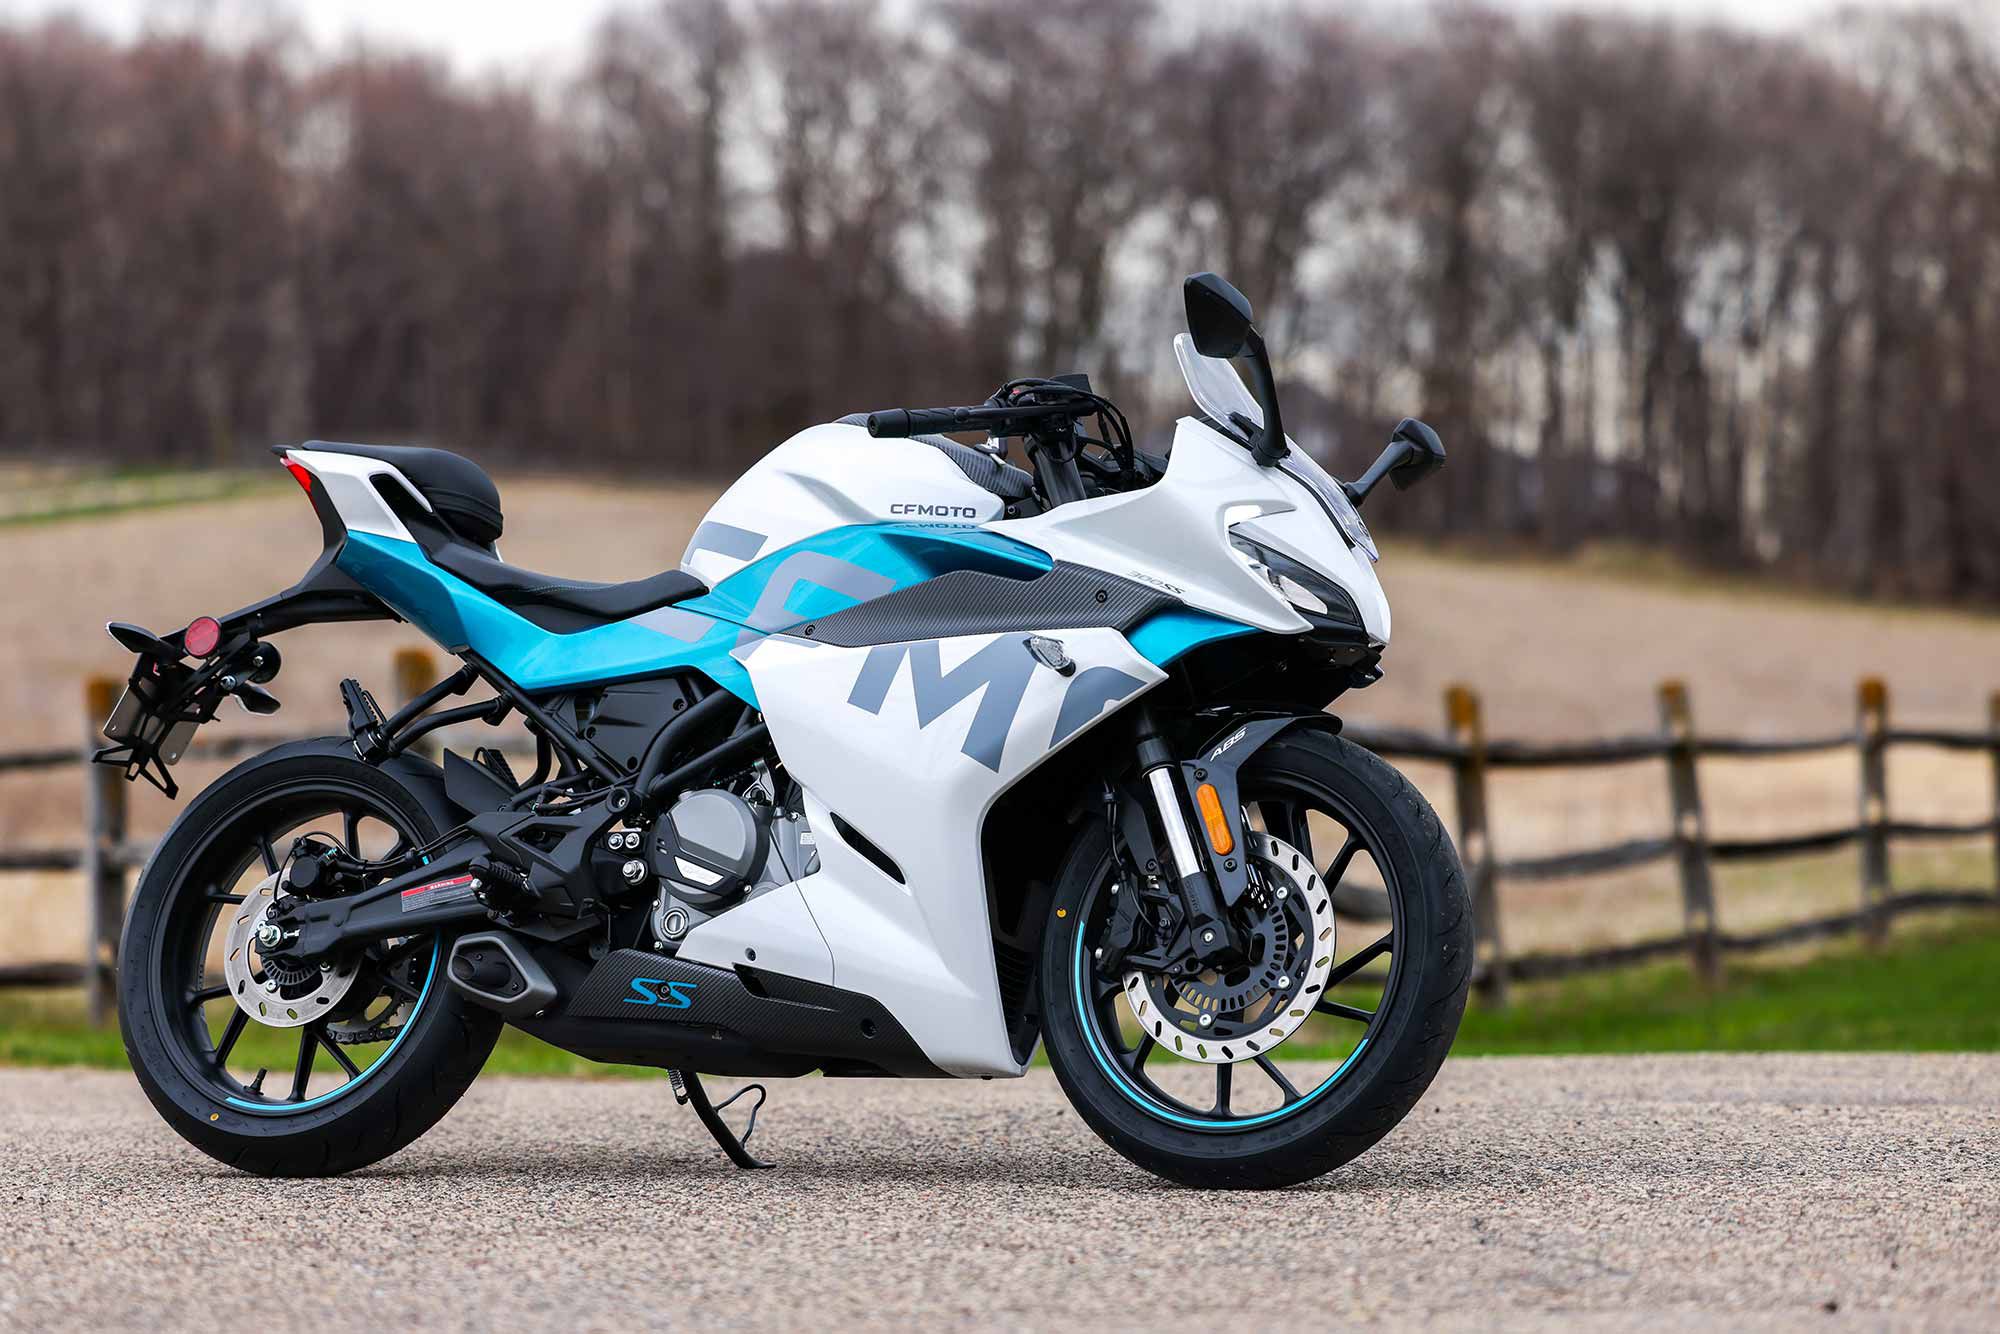 There are some borrowed design cues, but overall, the 300SS has a very unique look that helps it stand out from the mainstays in the sportbike space.